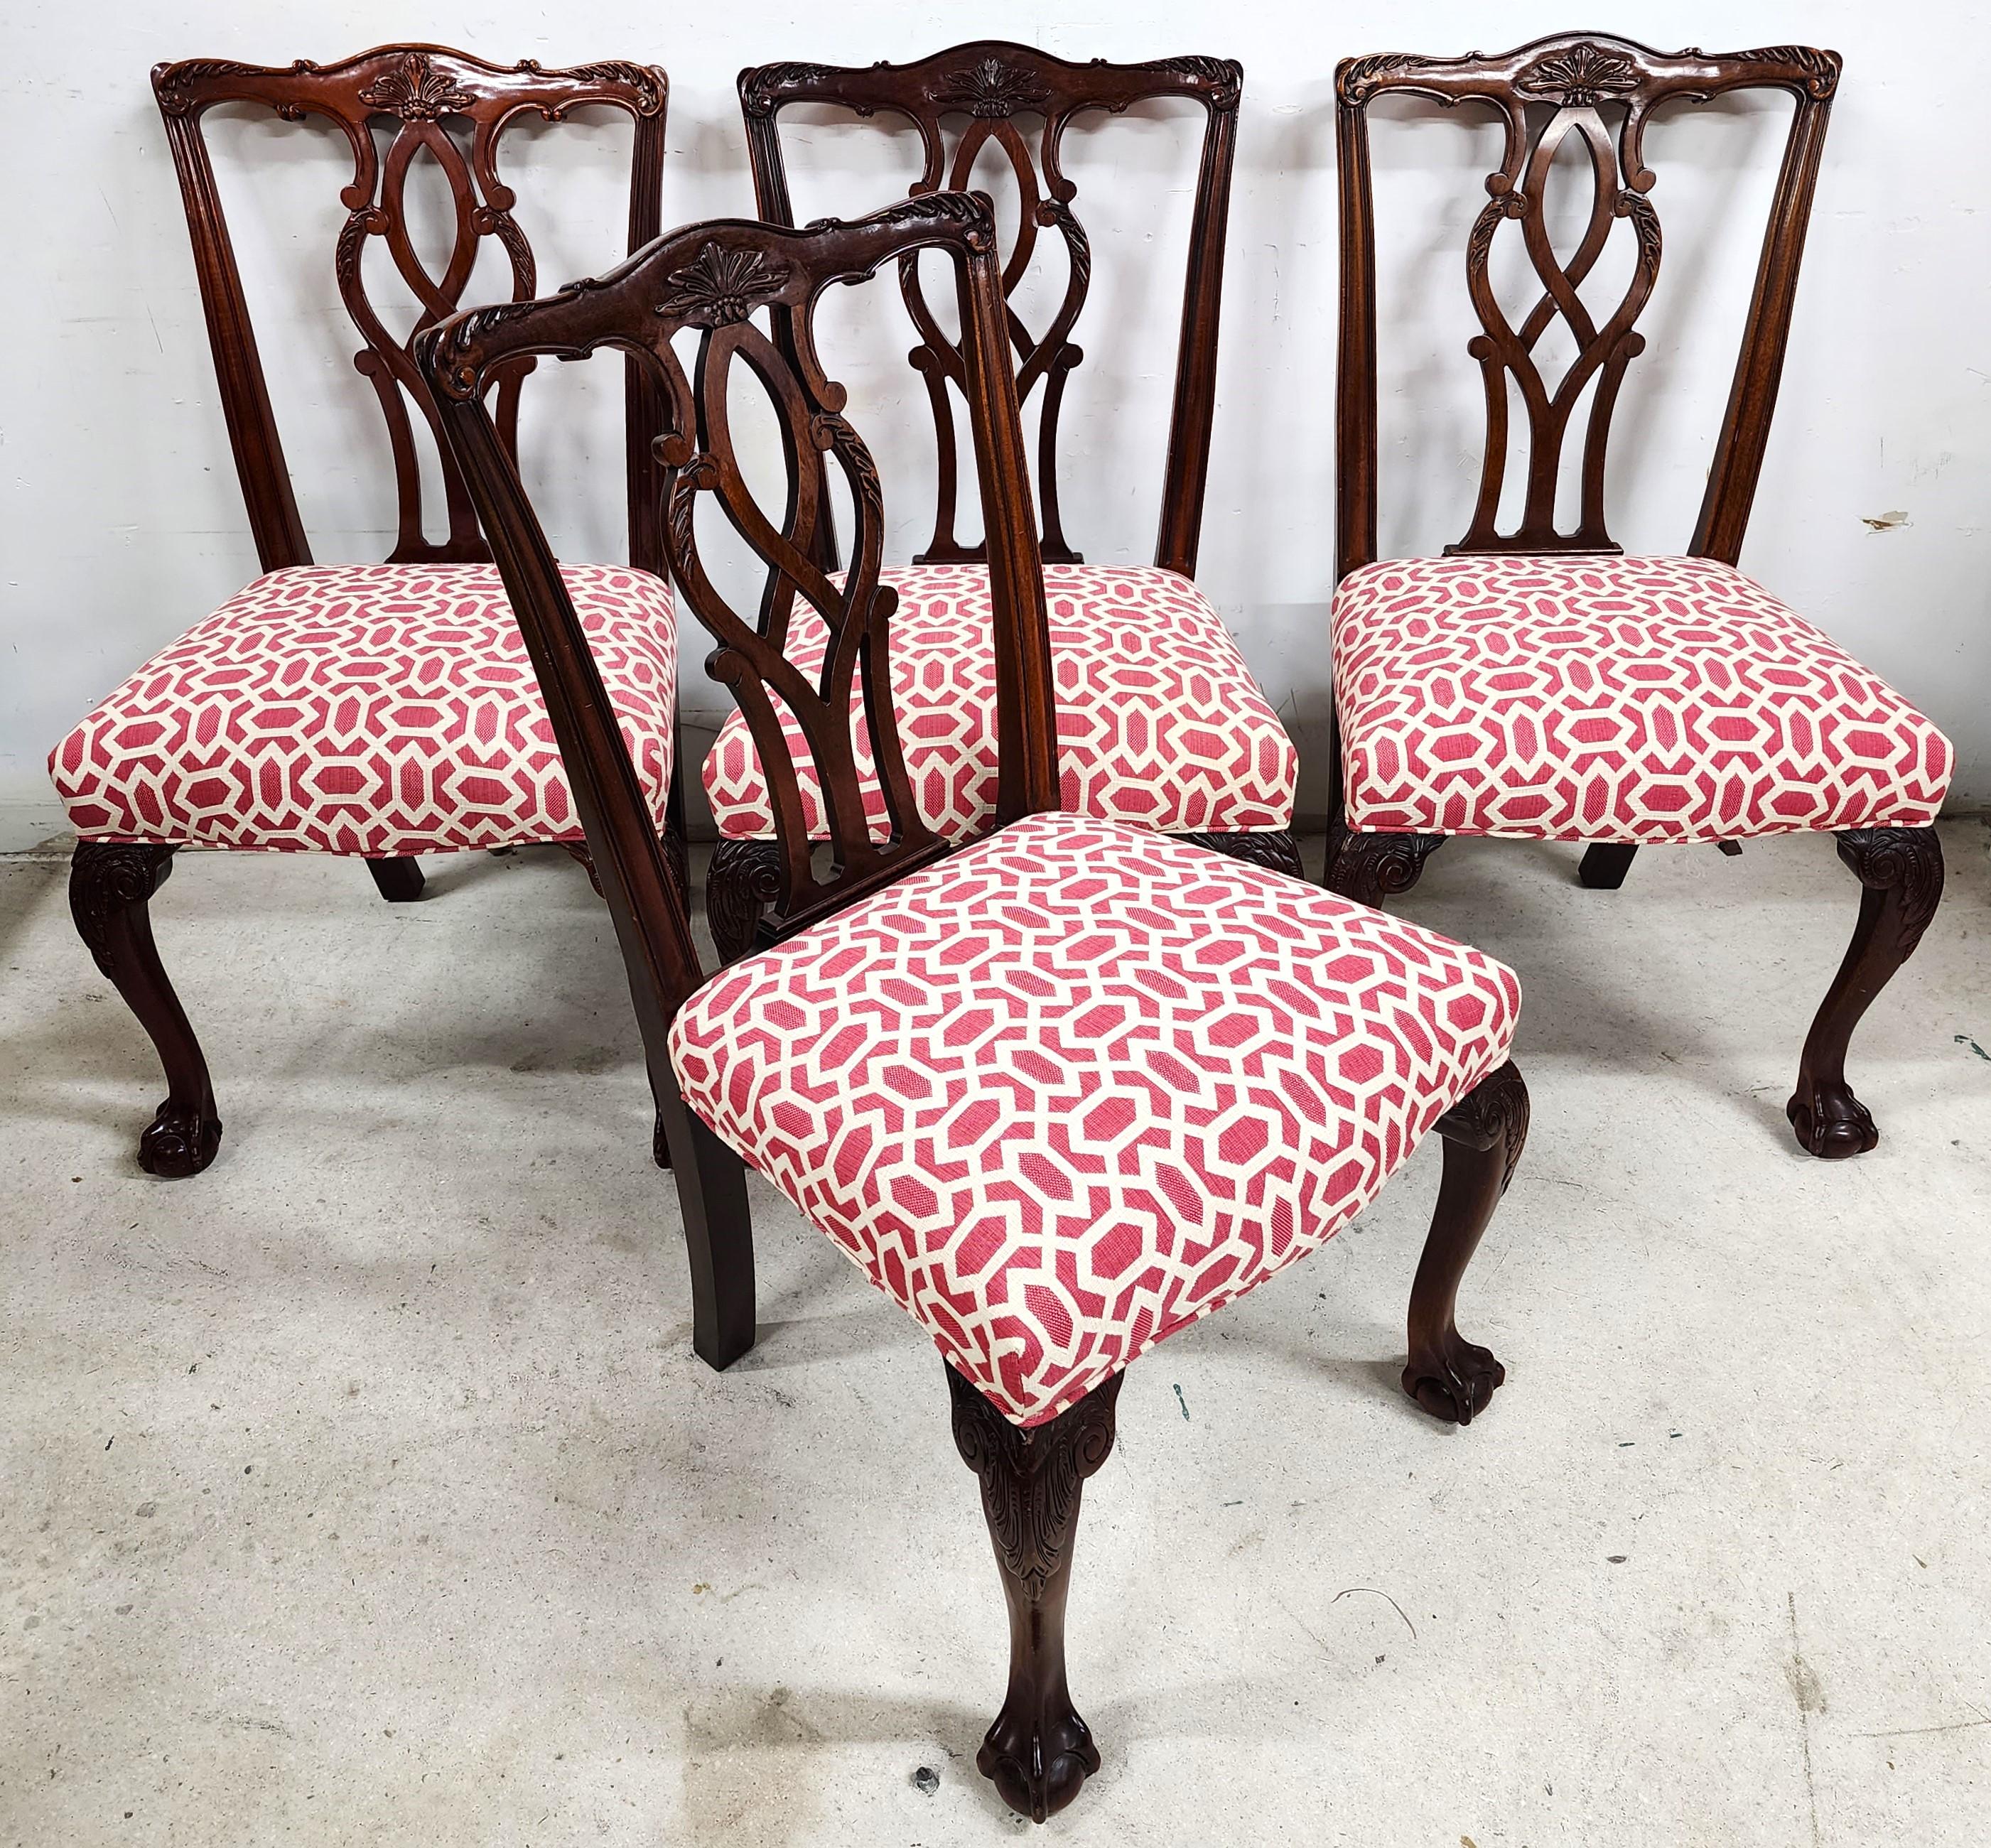 For FULL item description click on CONTINUE READING at the bottom of this page.

Offering One Of Our Recent Palm Beach Estate Fine Furniture Acquisitions Of A 
Set of 6 Kindel Chippendale Ball & Claw Dining Chairs Model 76-076

Coloration: Fabric is